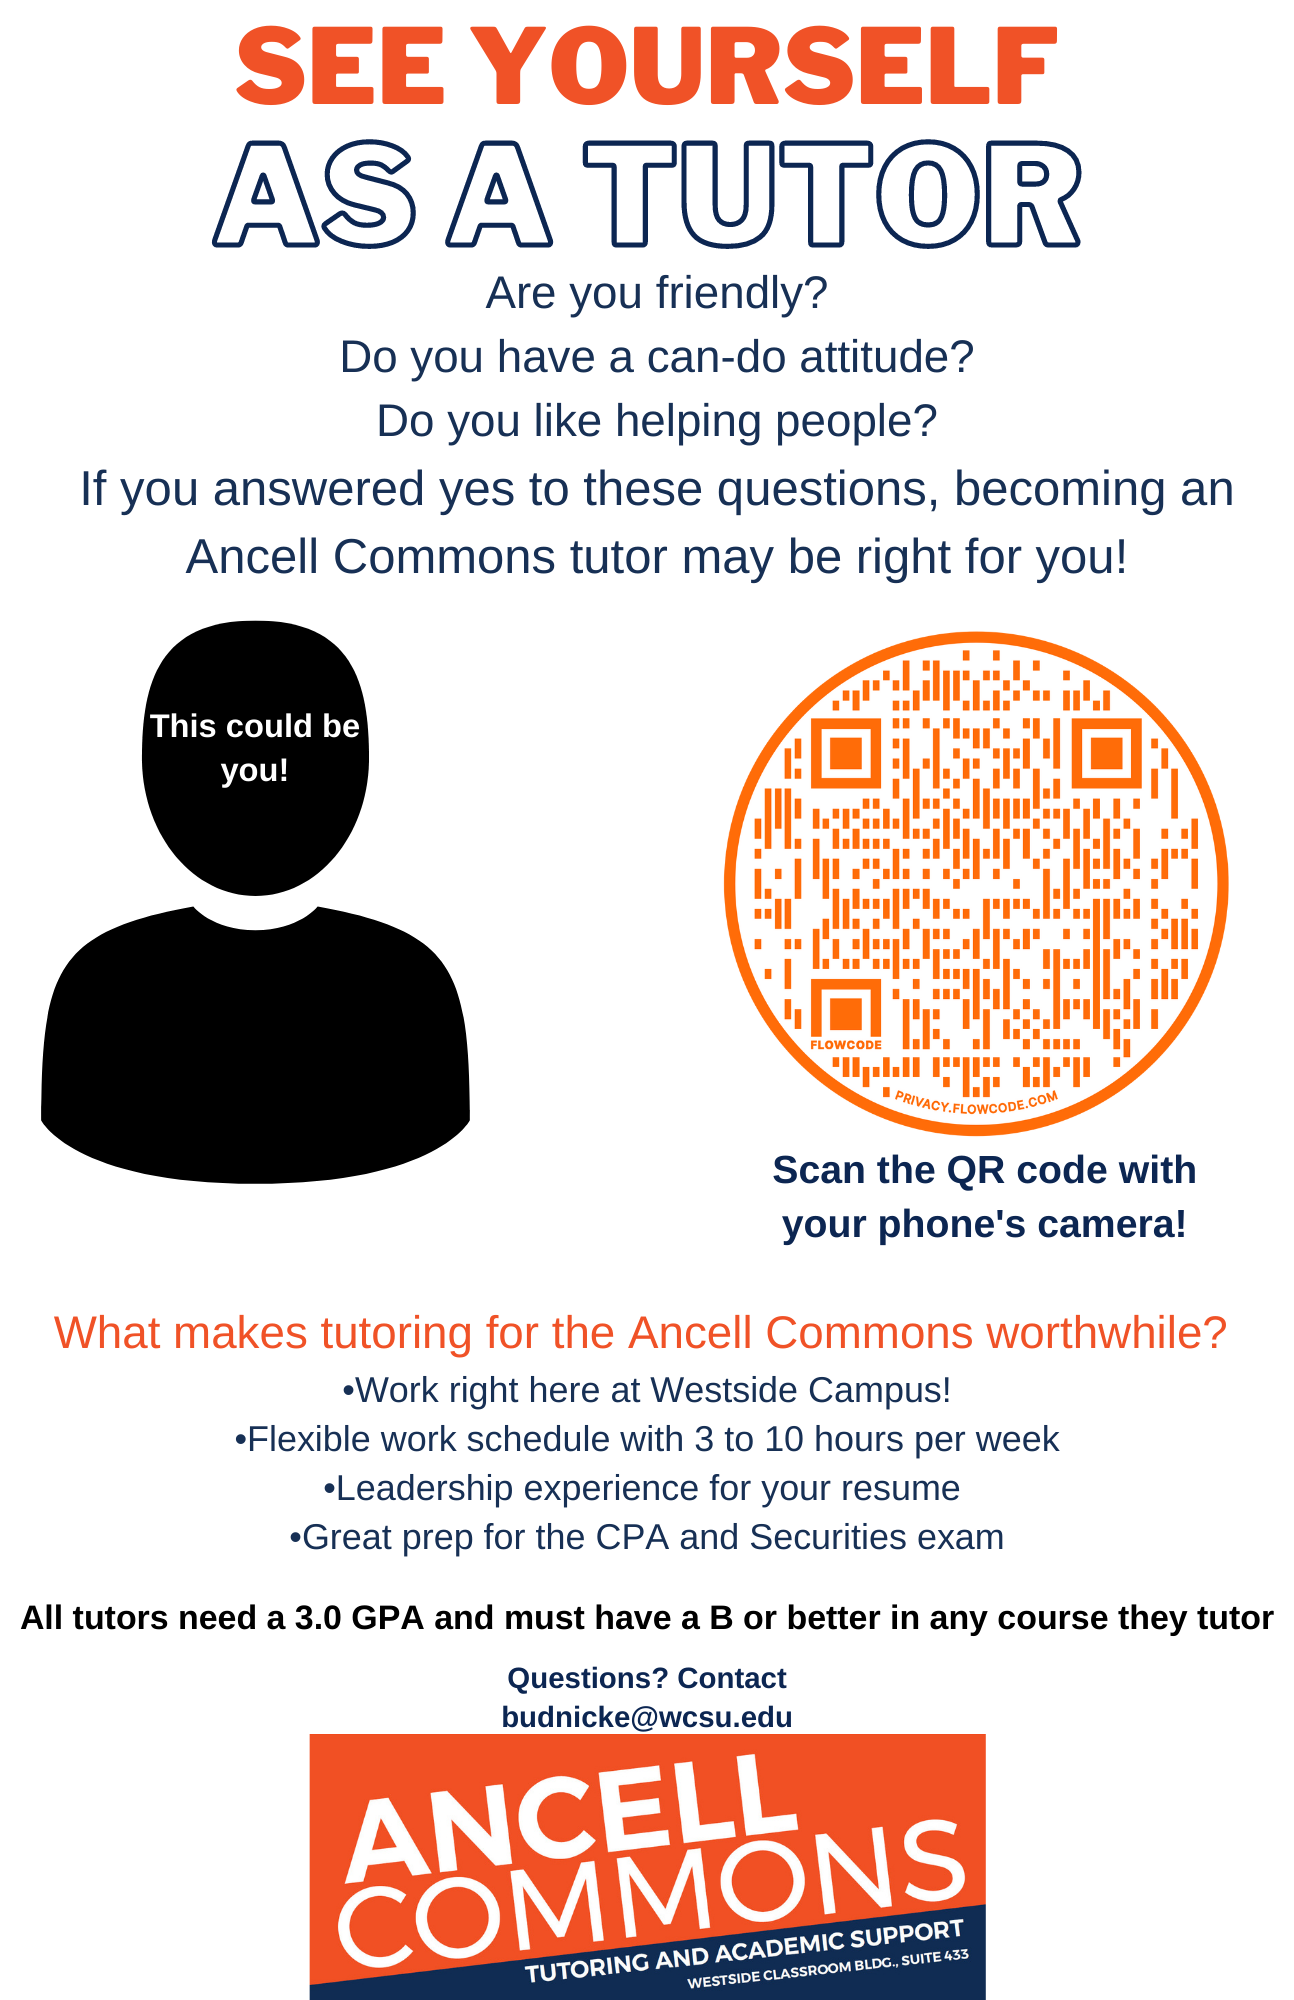 See Yourself as a Tutor - Ancell Commons